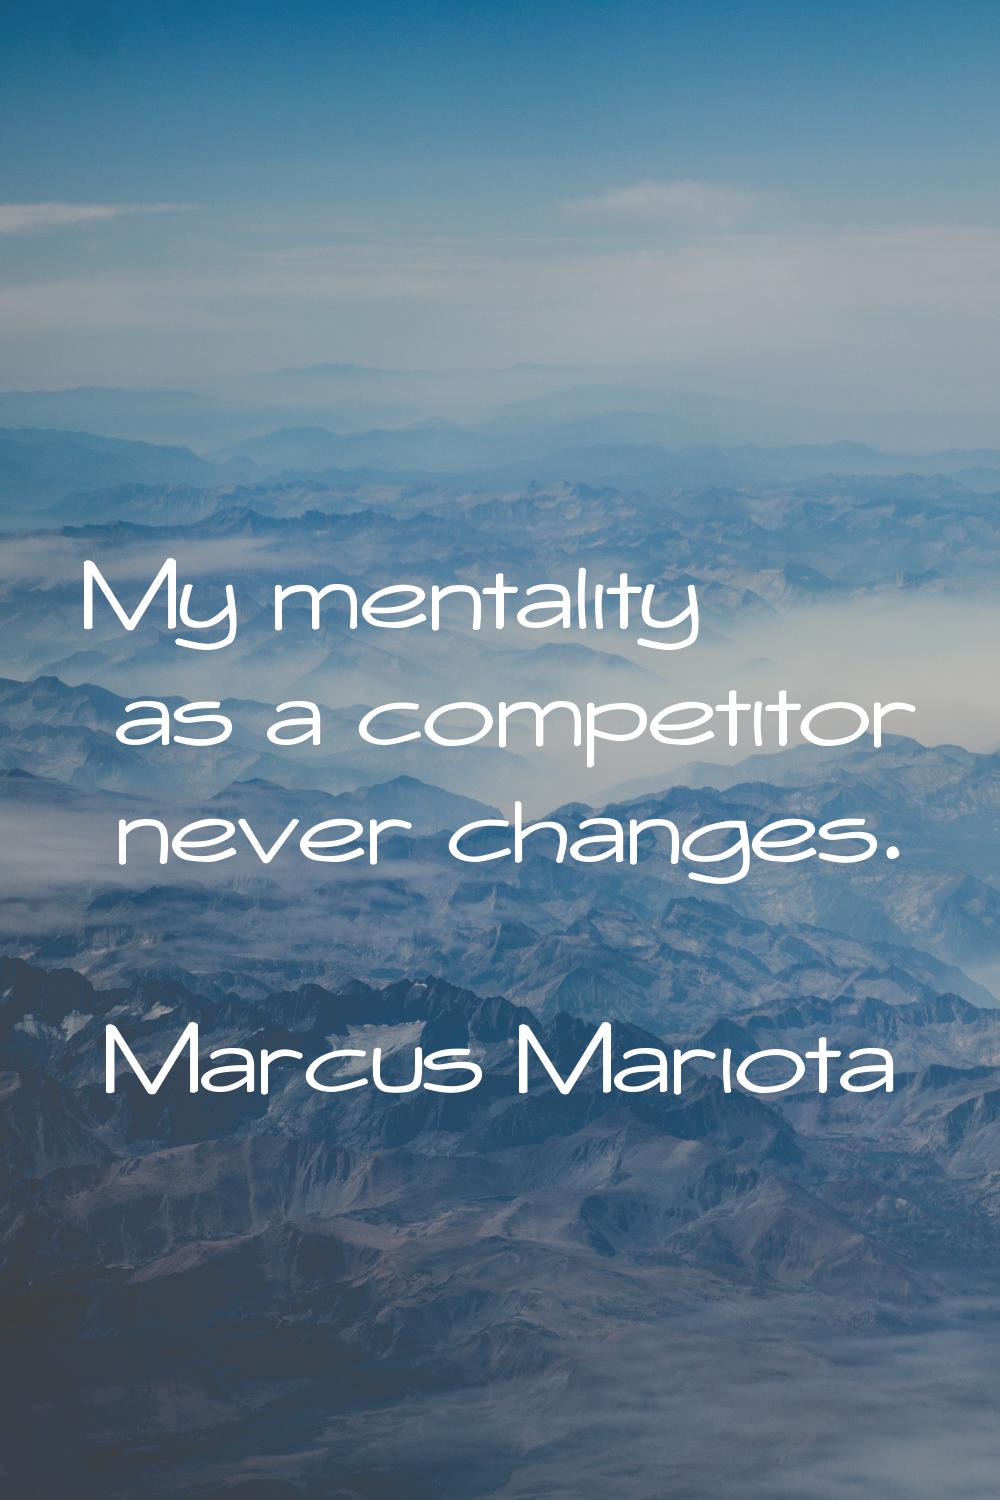 My mentality as a competitor never changes.